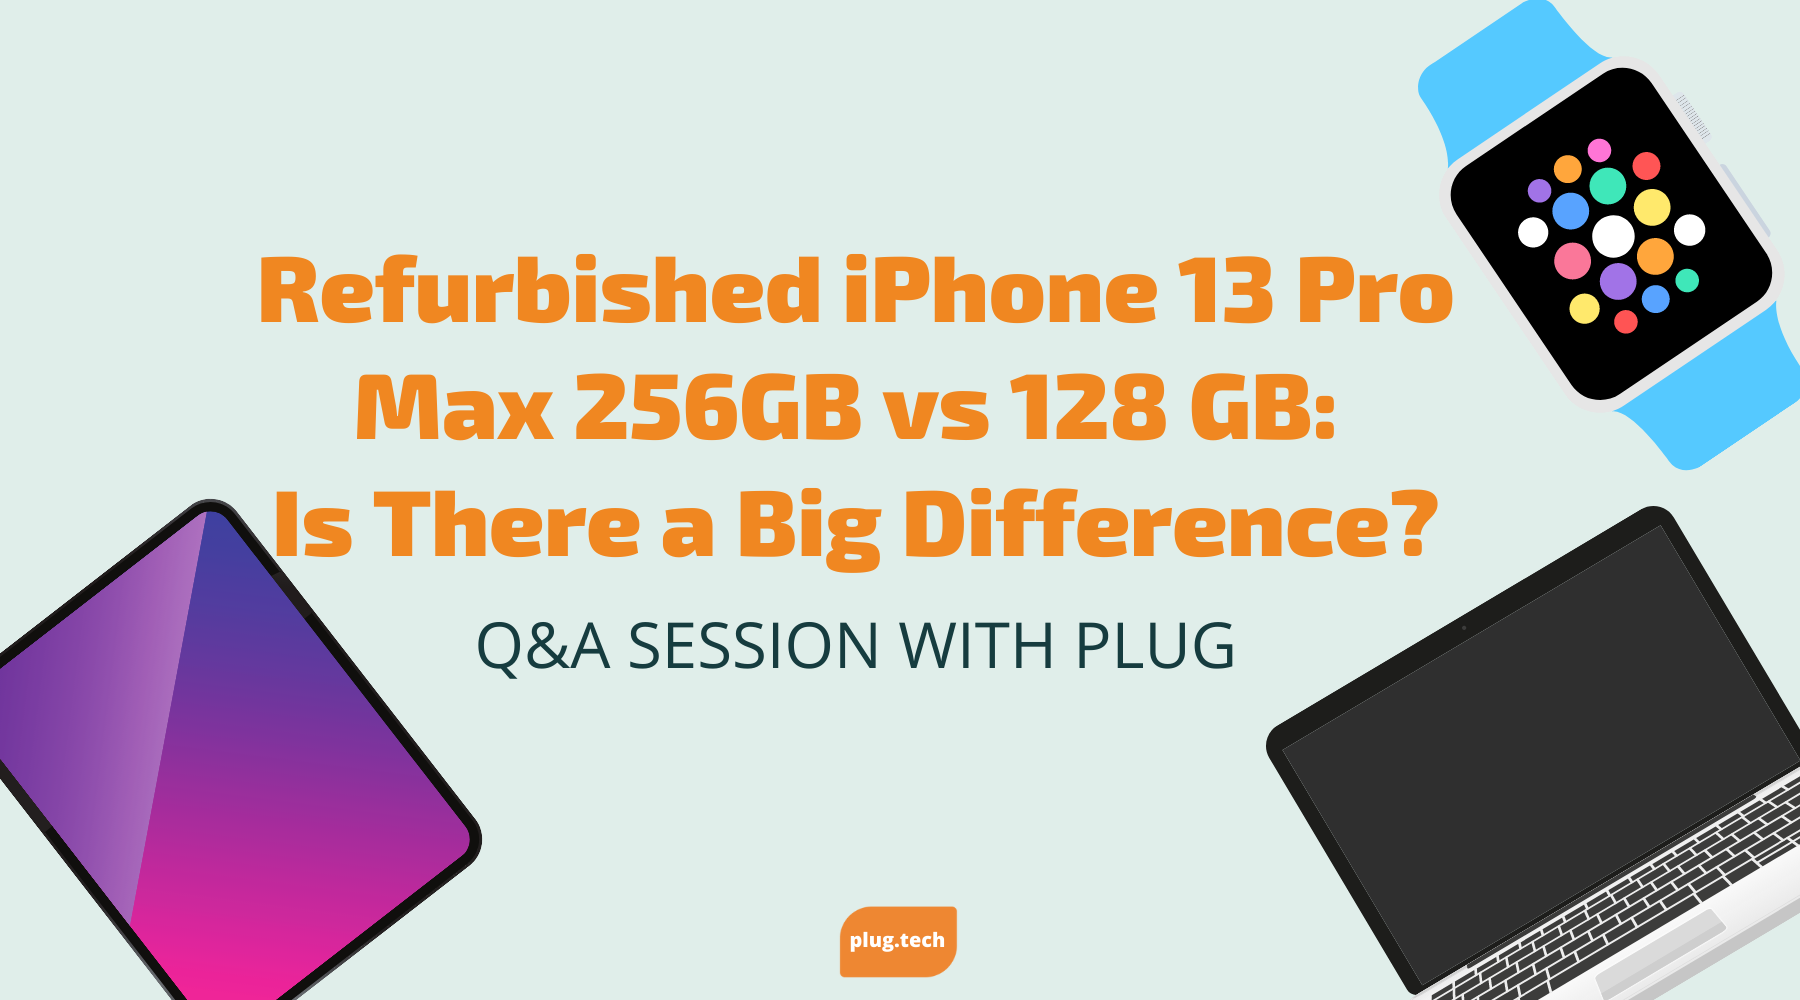 Refurbished iPhone 13 Pro Max 256GB vs 128 GB: Is There a Big Difference?